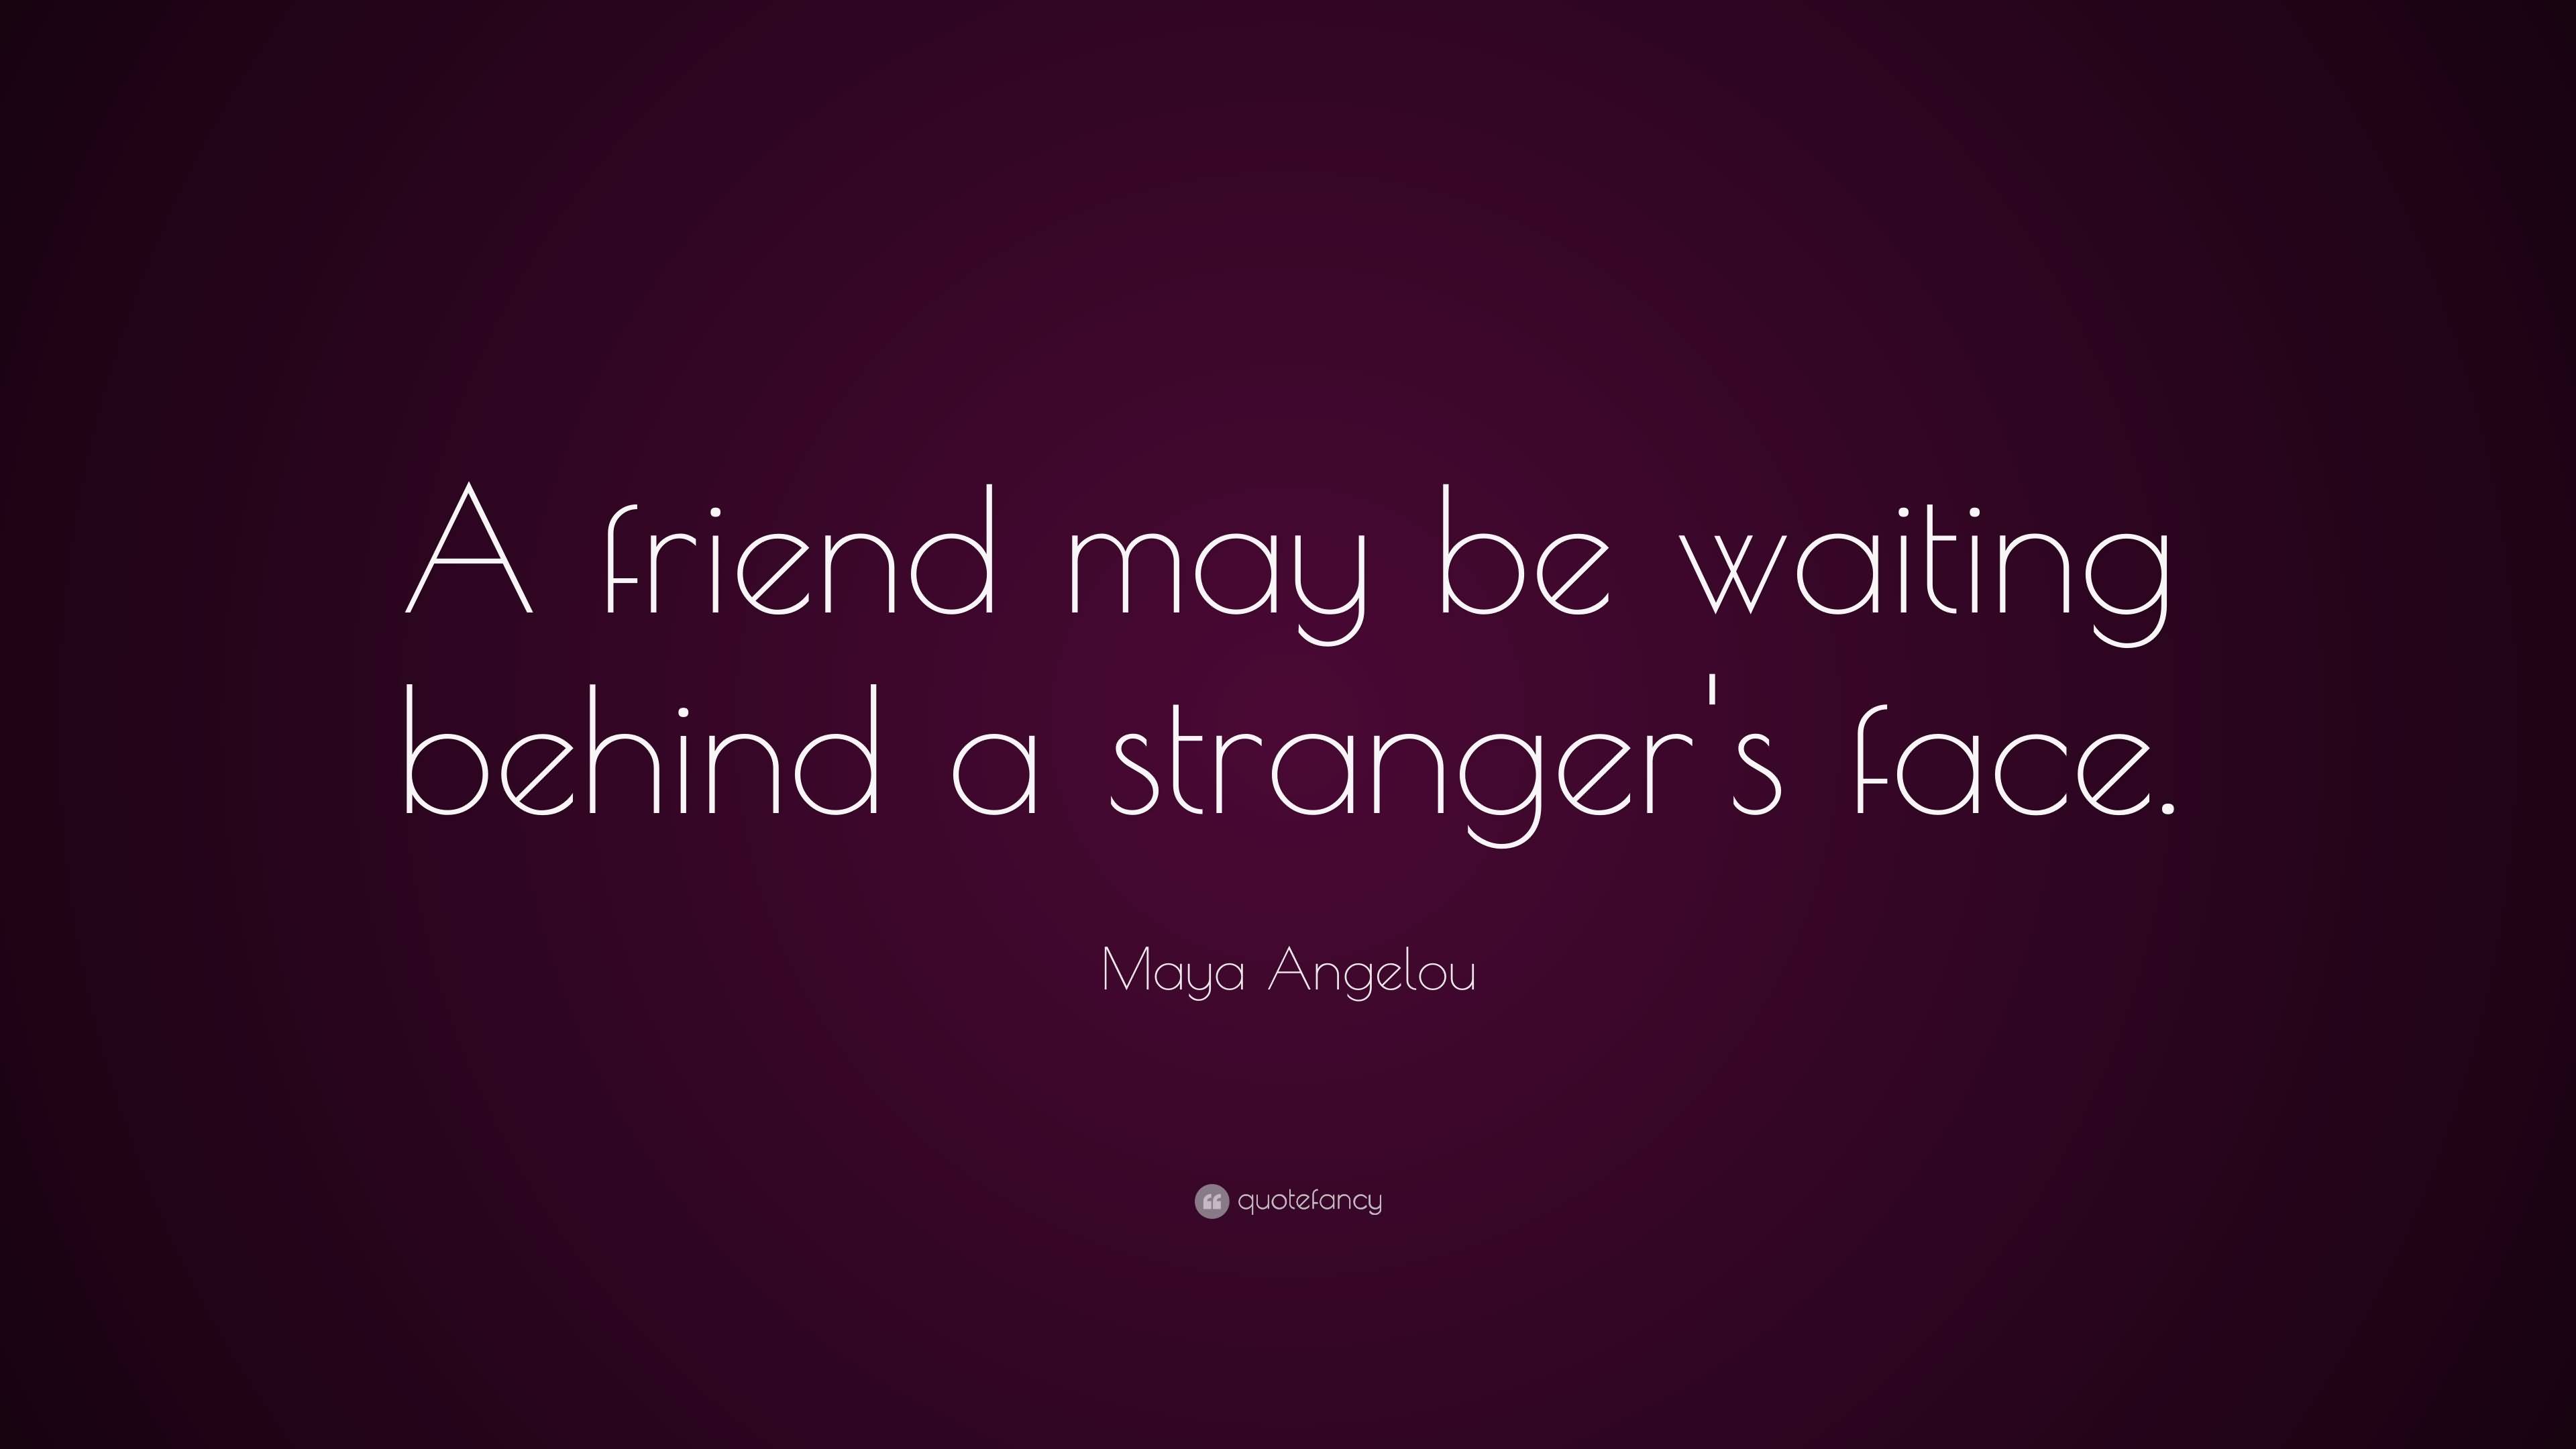 Maya Angelou Quotes About Friendship 20